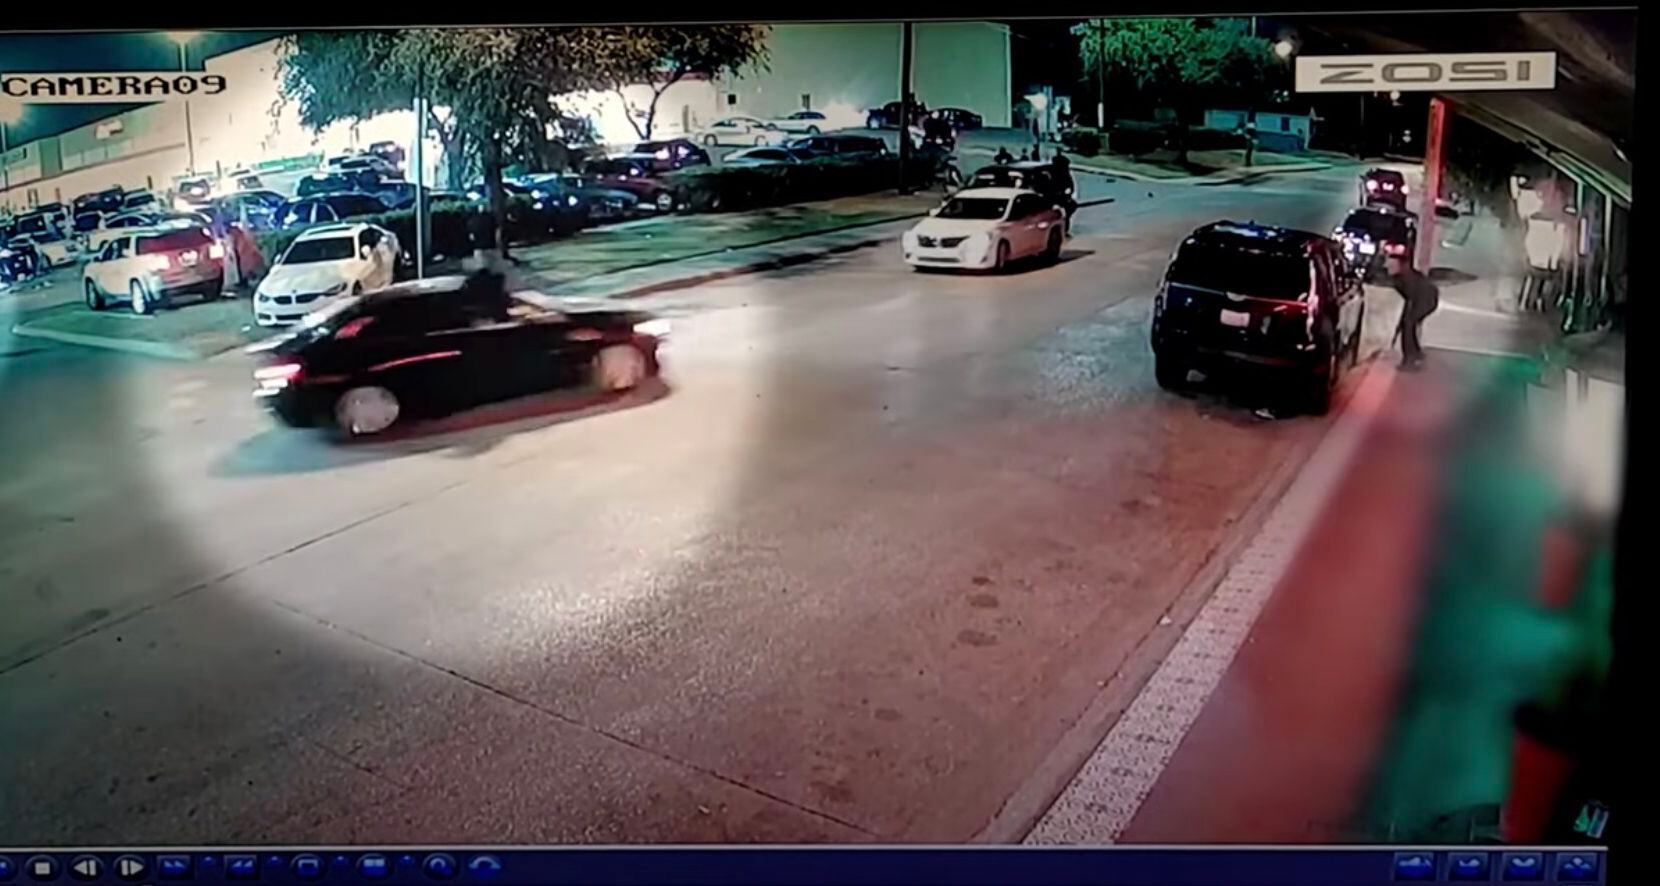 Surveillance footage released by police Monday shows a security guard fire into the air...